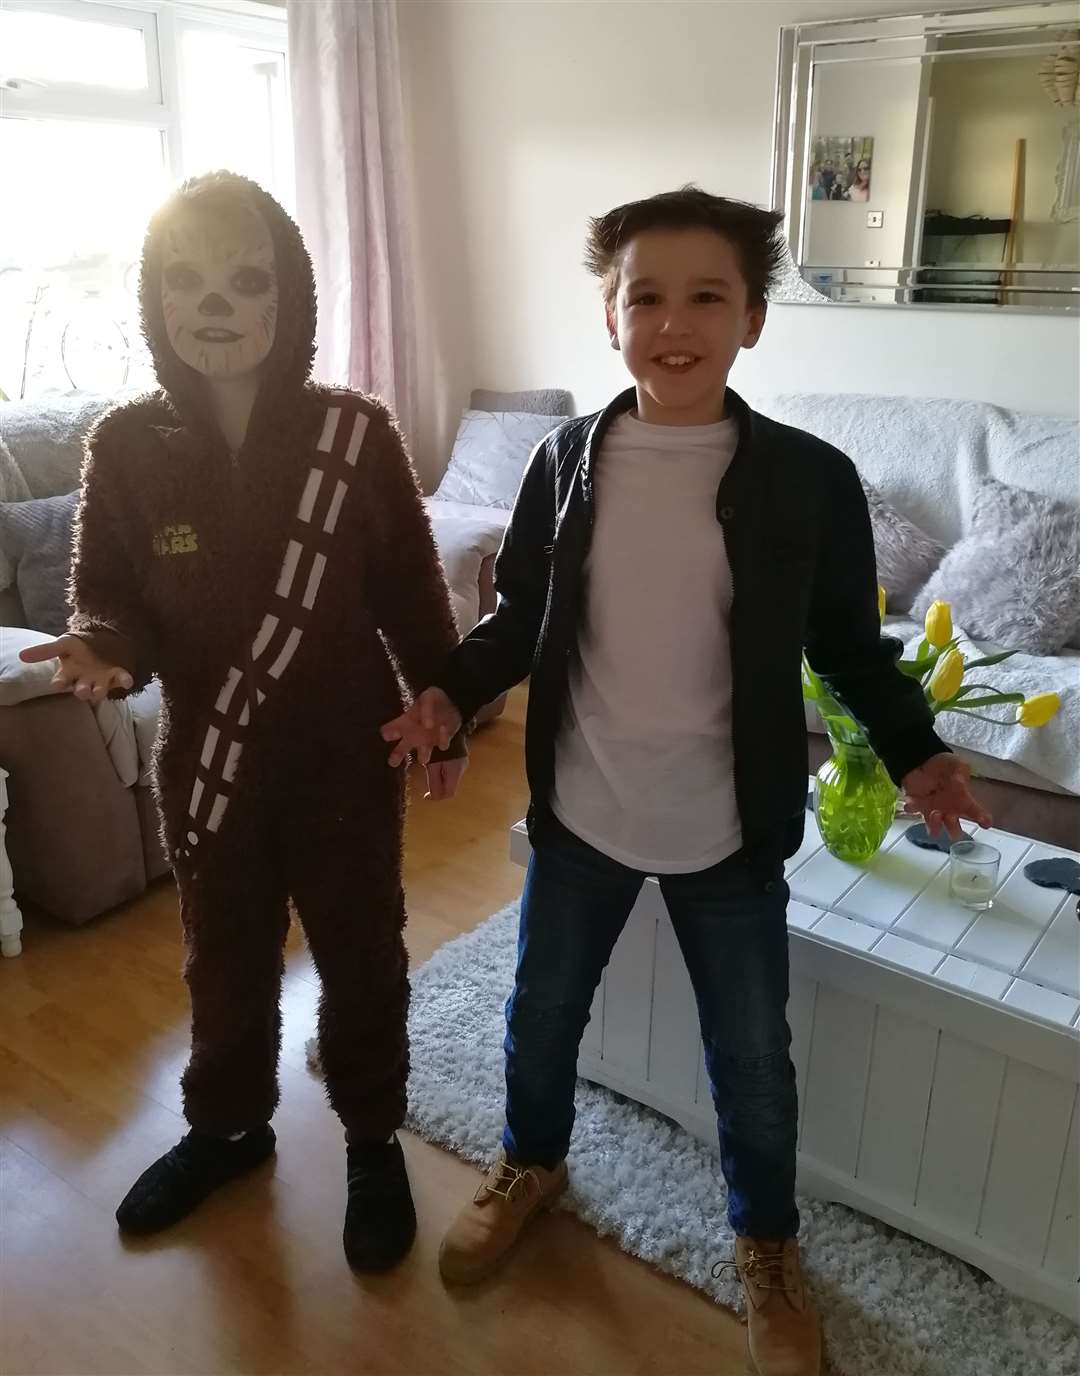 Jack and Eli as Wookie and Wolverine going to Southborough School in Maidstone